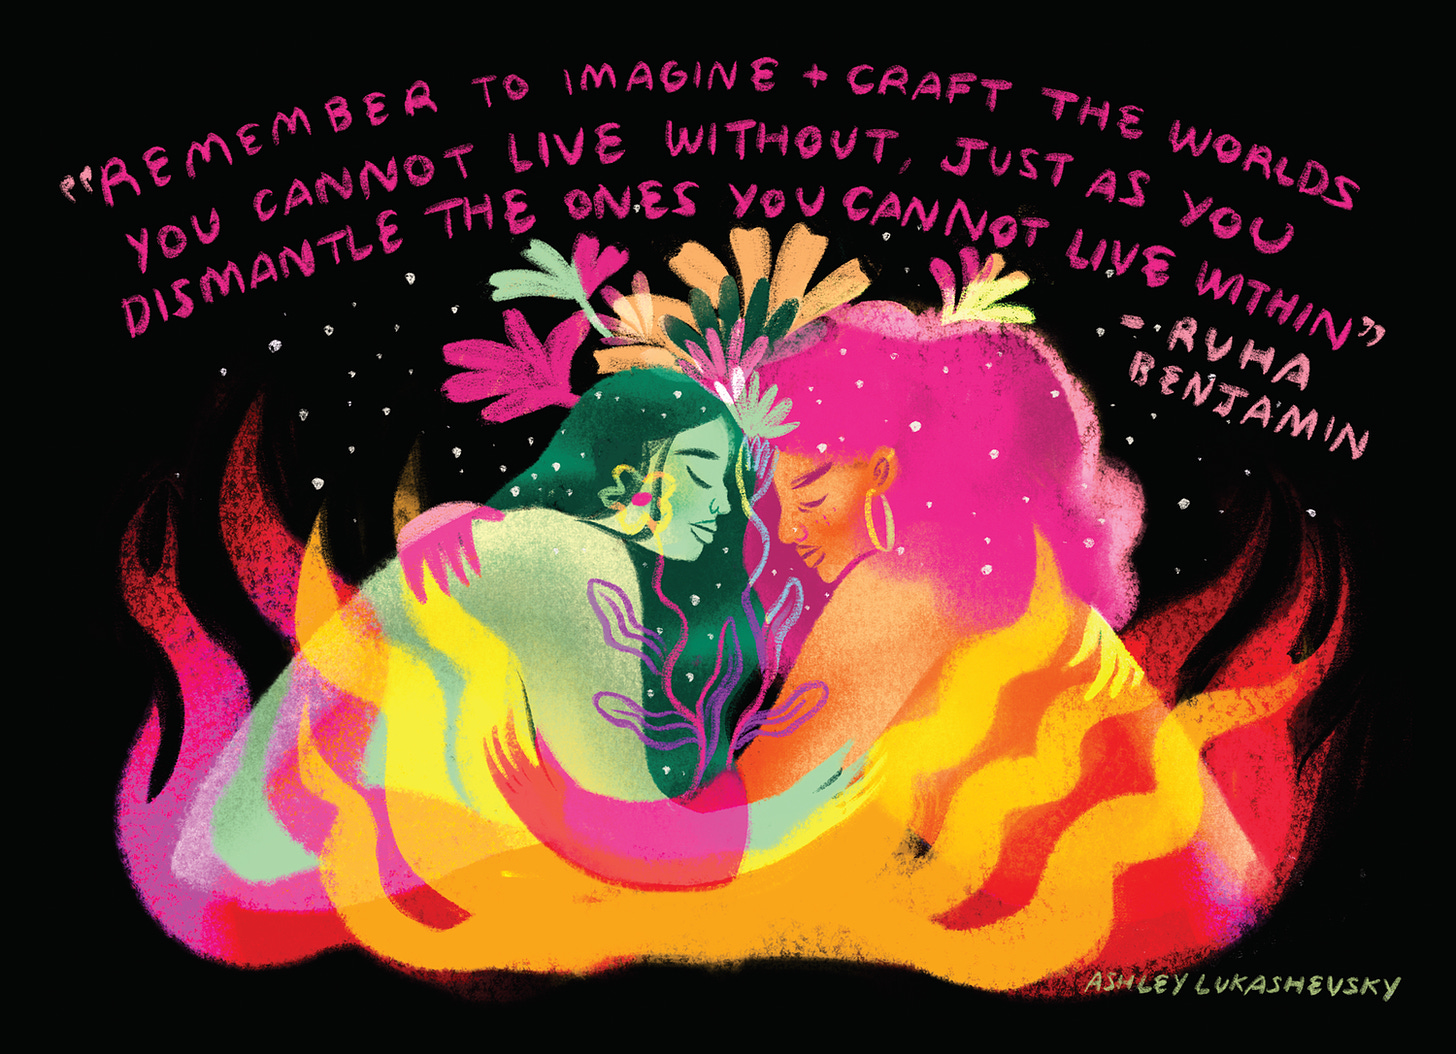 Over a black background, a sketch of two femme-presenting people embracing among flames and flowers. The colors are neon pink, orange, yellow, with green and peach tones, as well. Above them, a quote reads: "Remember to imagine + craft the worlds you cannot live without just as you dismantle the ones you cannot live within." Ruha Benjamin